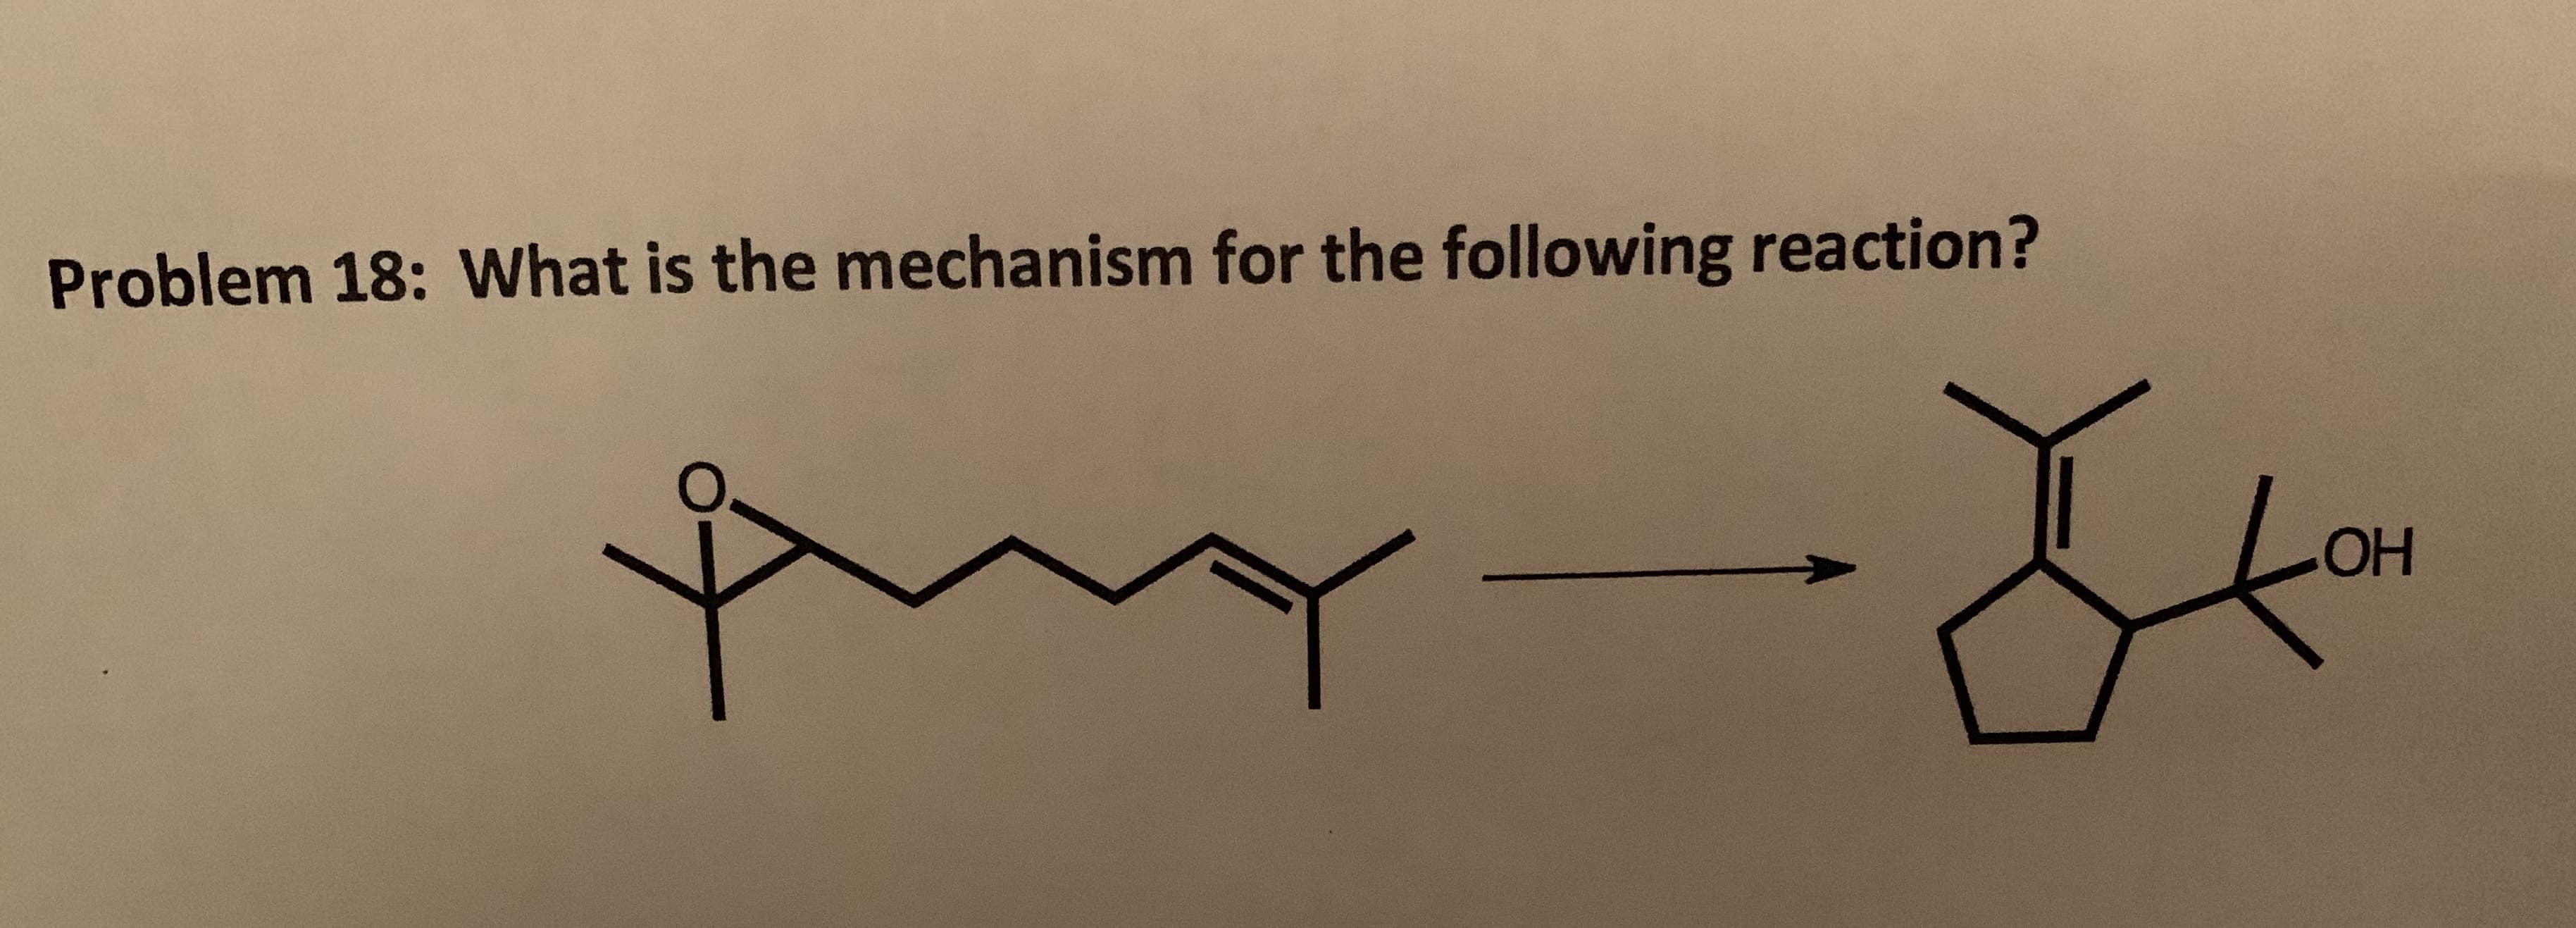 Problem 18: What is the mechanism for the following reaction?
OH
